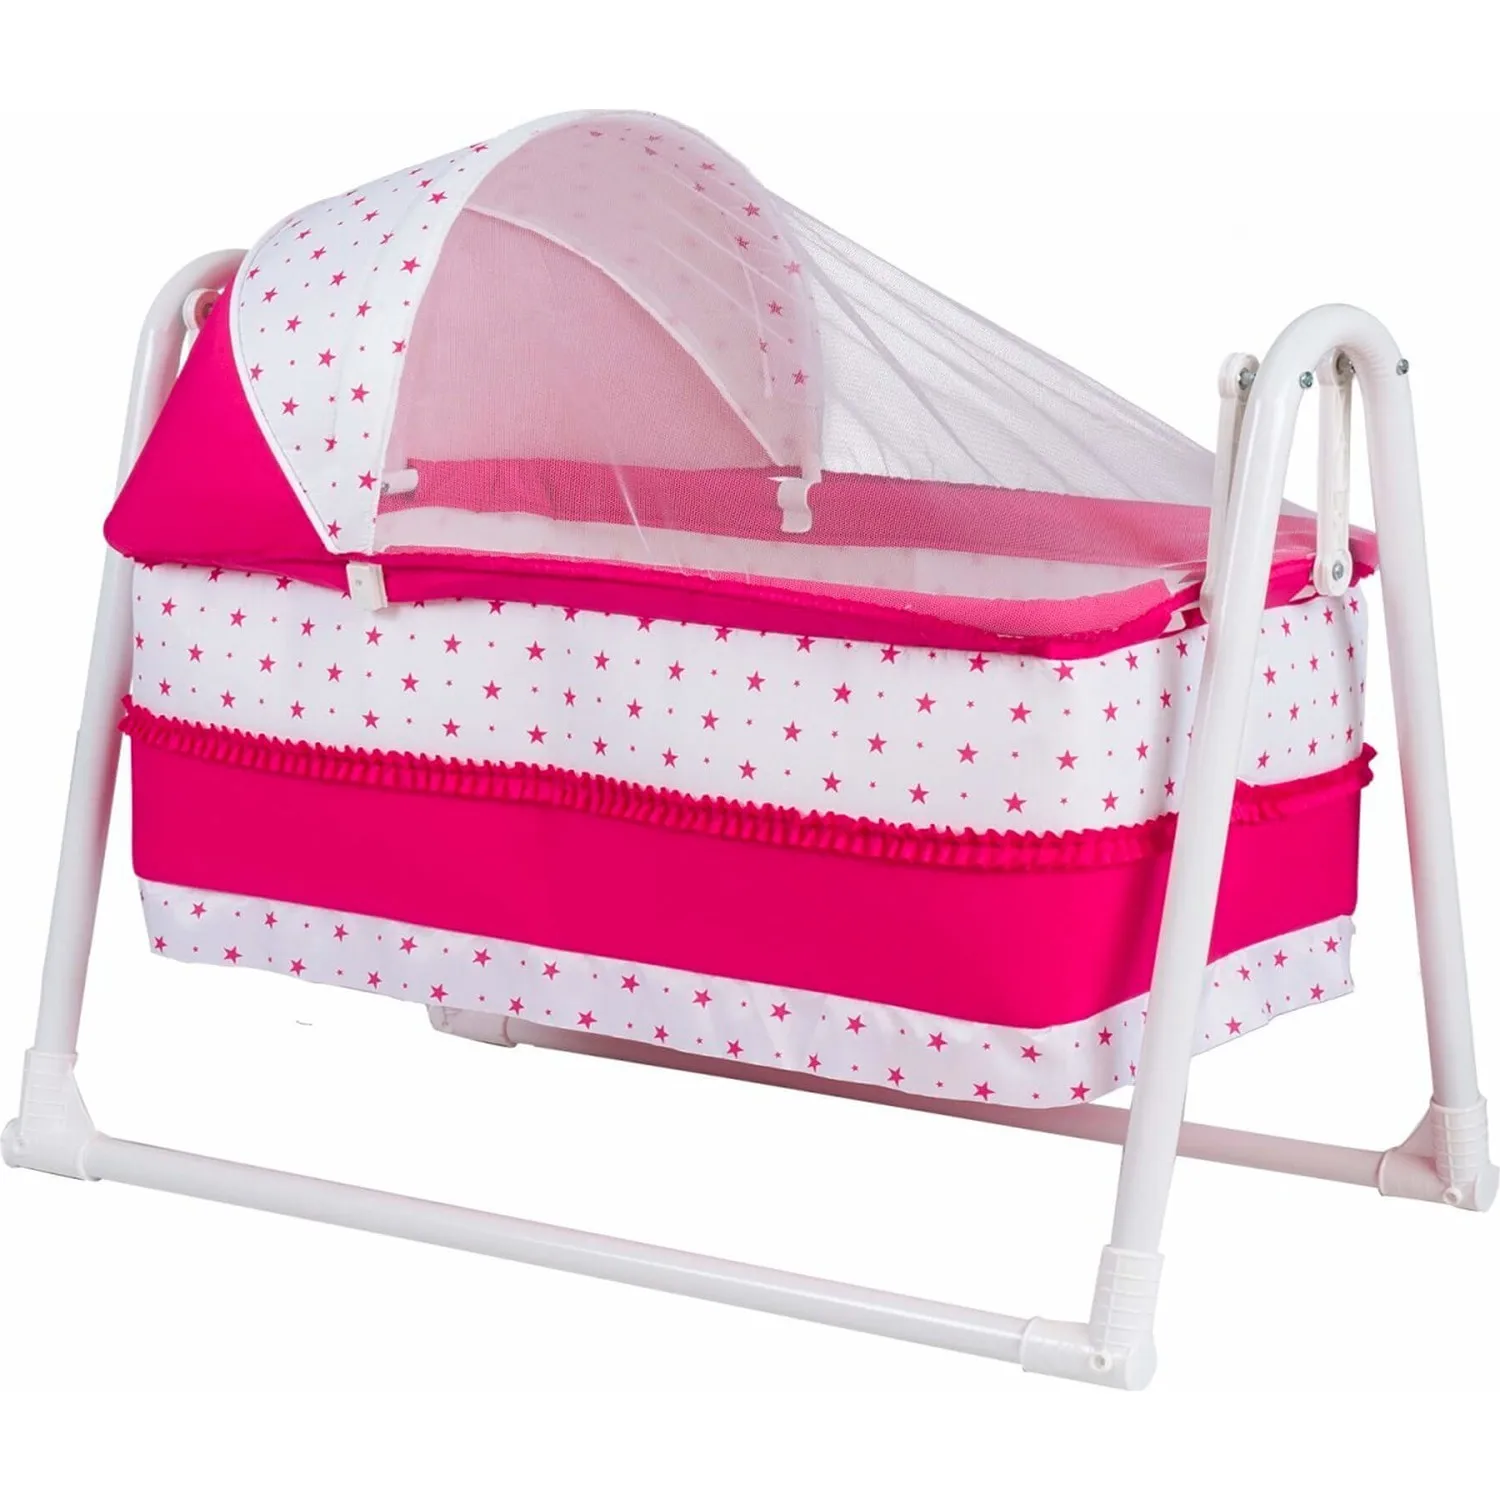 Luxury Baby Bed Basket Portable Cradle Crib Rocking Hanging Bassinet Mosquito net included P